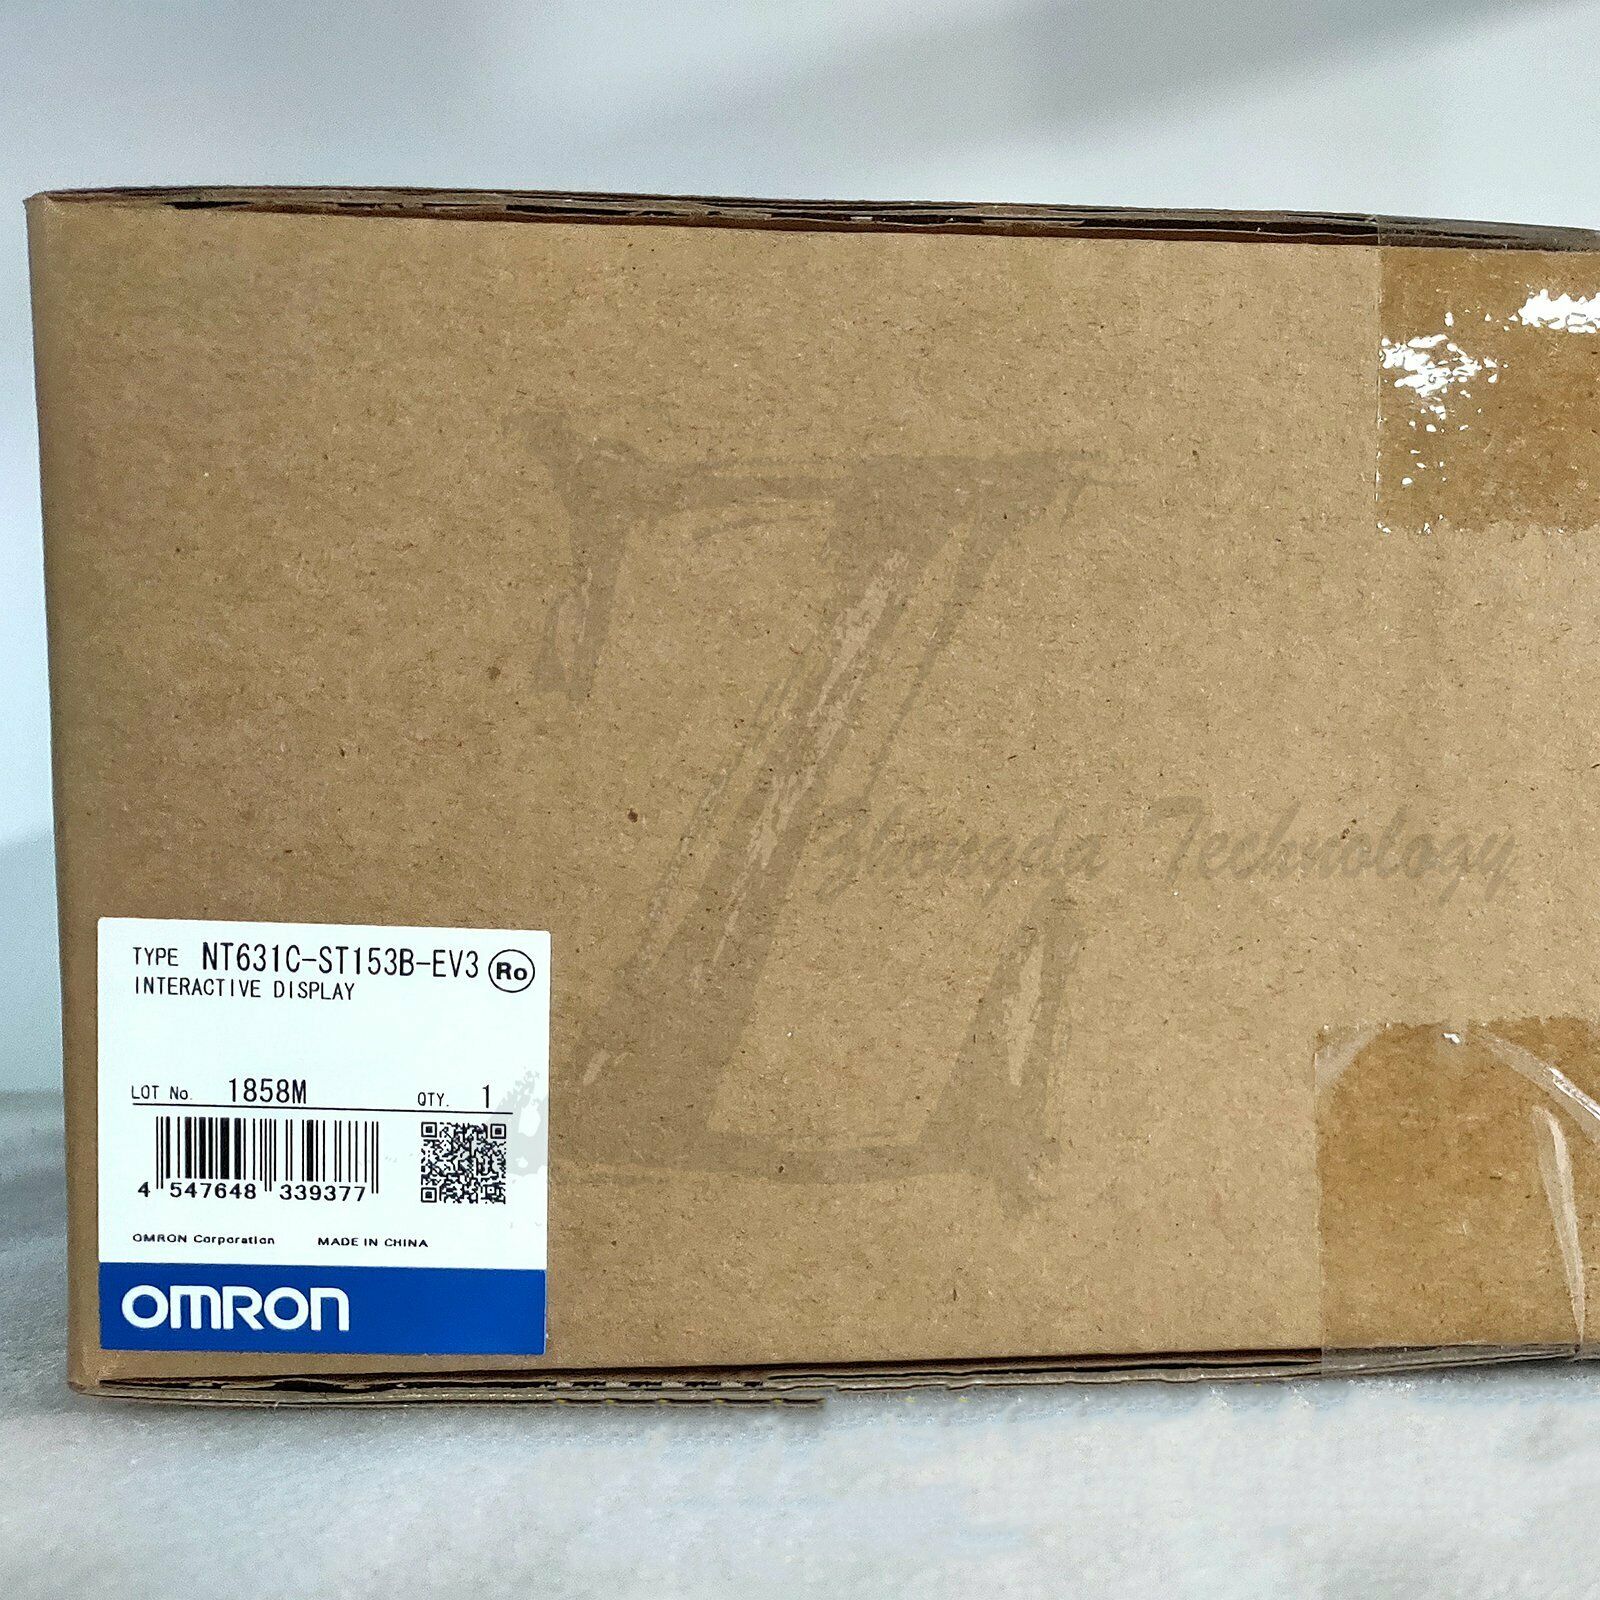 1pc new Omron NT631C-ST153B-EV3 module one year warranty KOEED 500+, 80%, import_2020_10_10_031751, Omron, Other